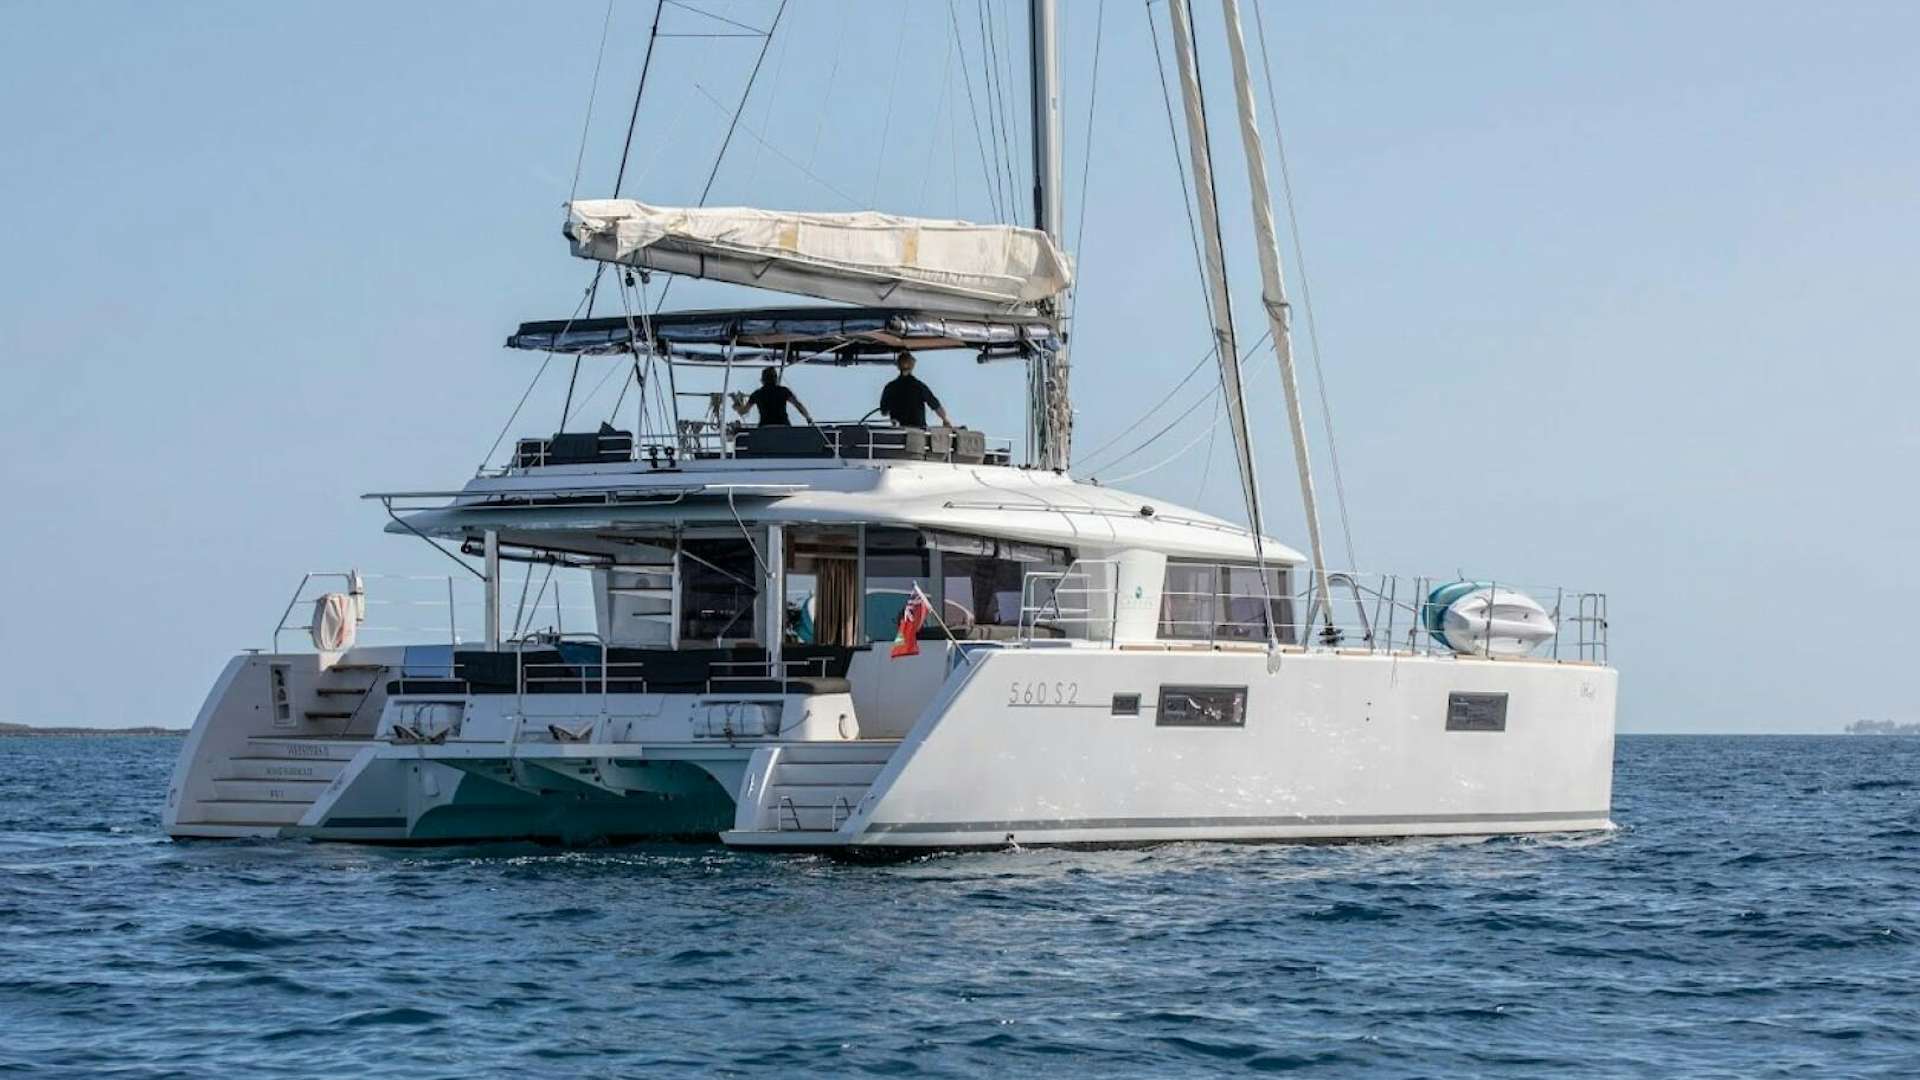 No name-lagoon 560
Yacht for Sale